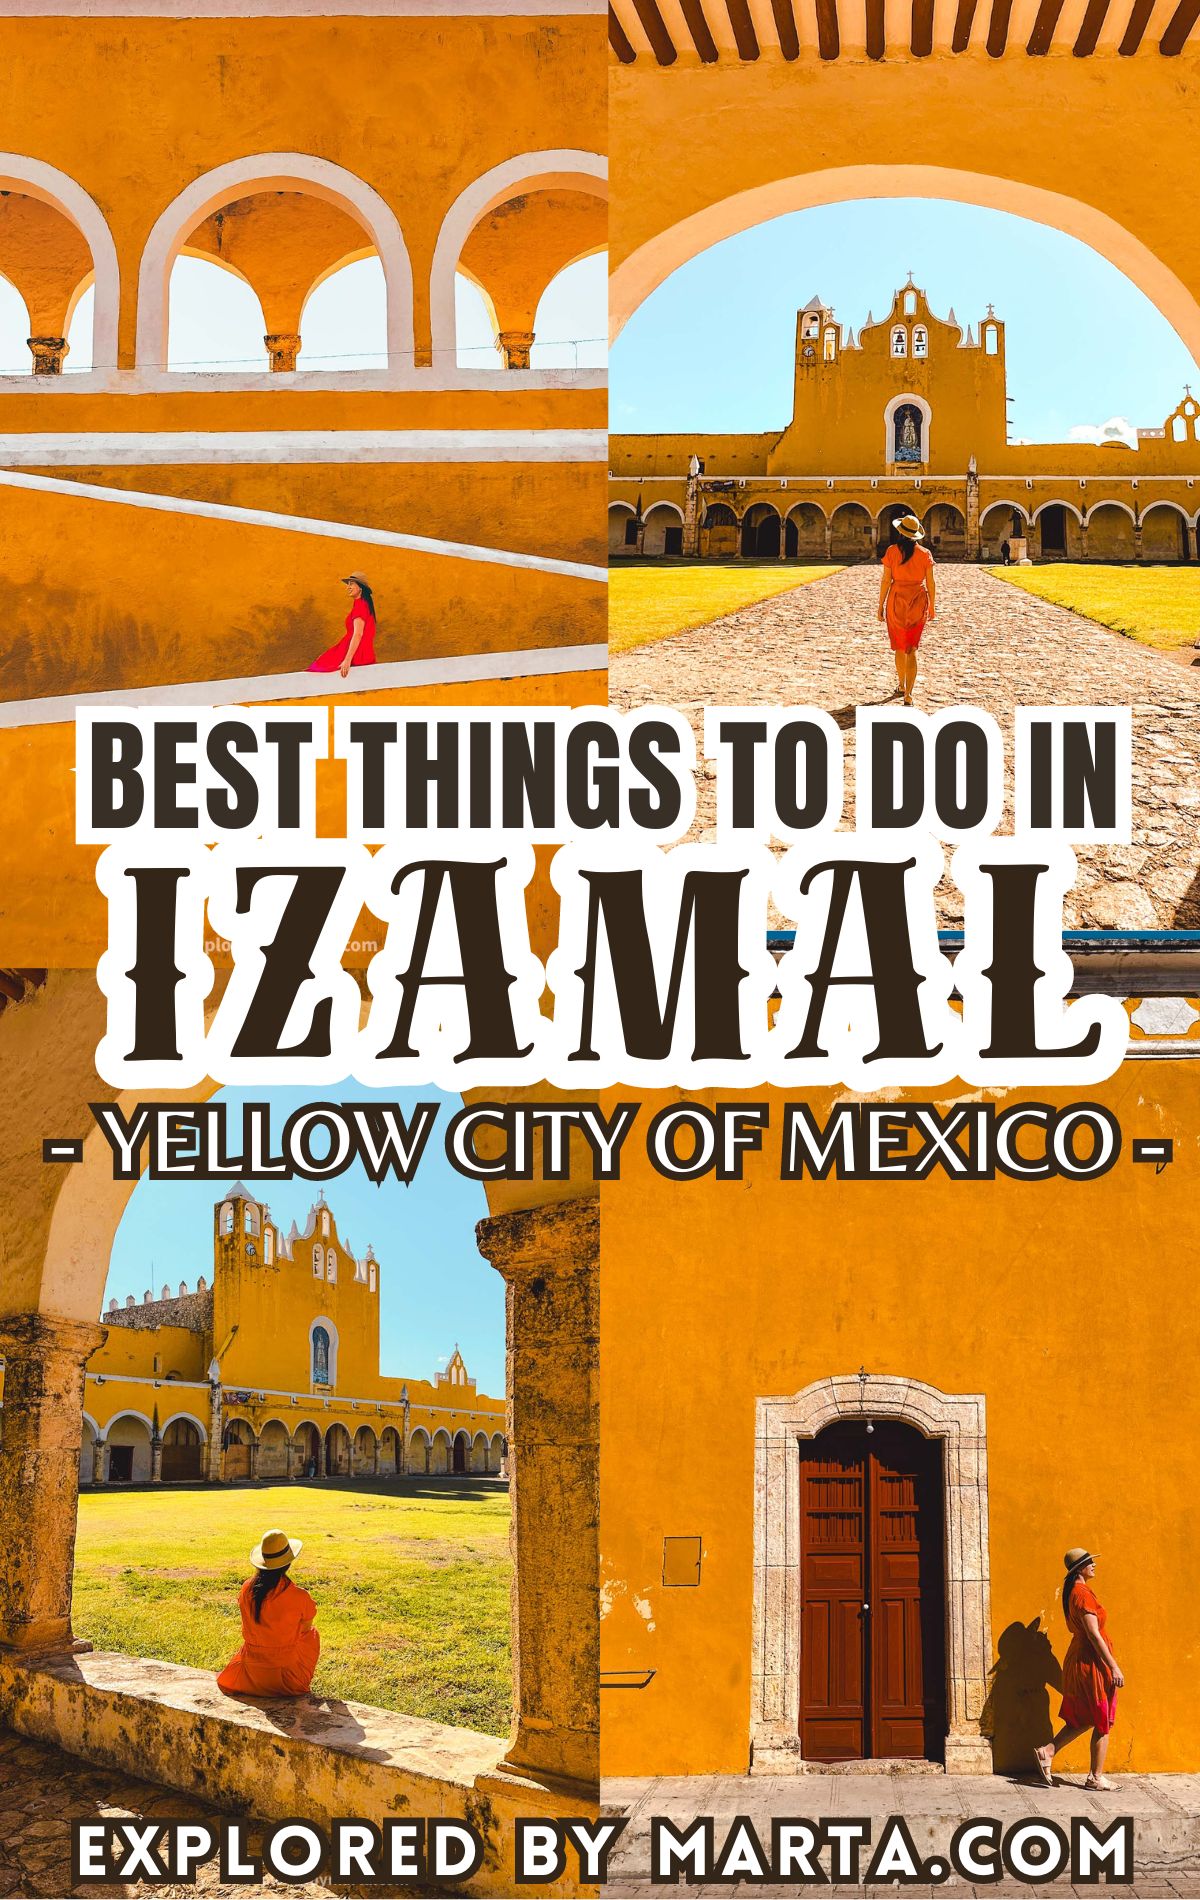 Best things to do in Izamal, Mexico - the Yellow City in the Yucatan Peninsula